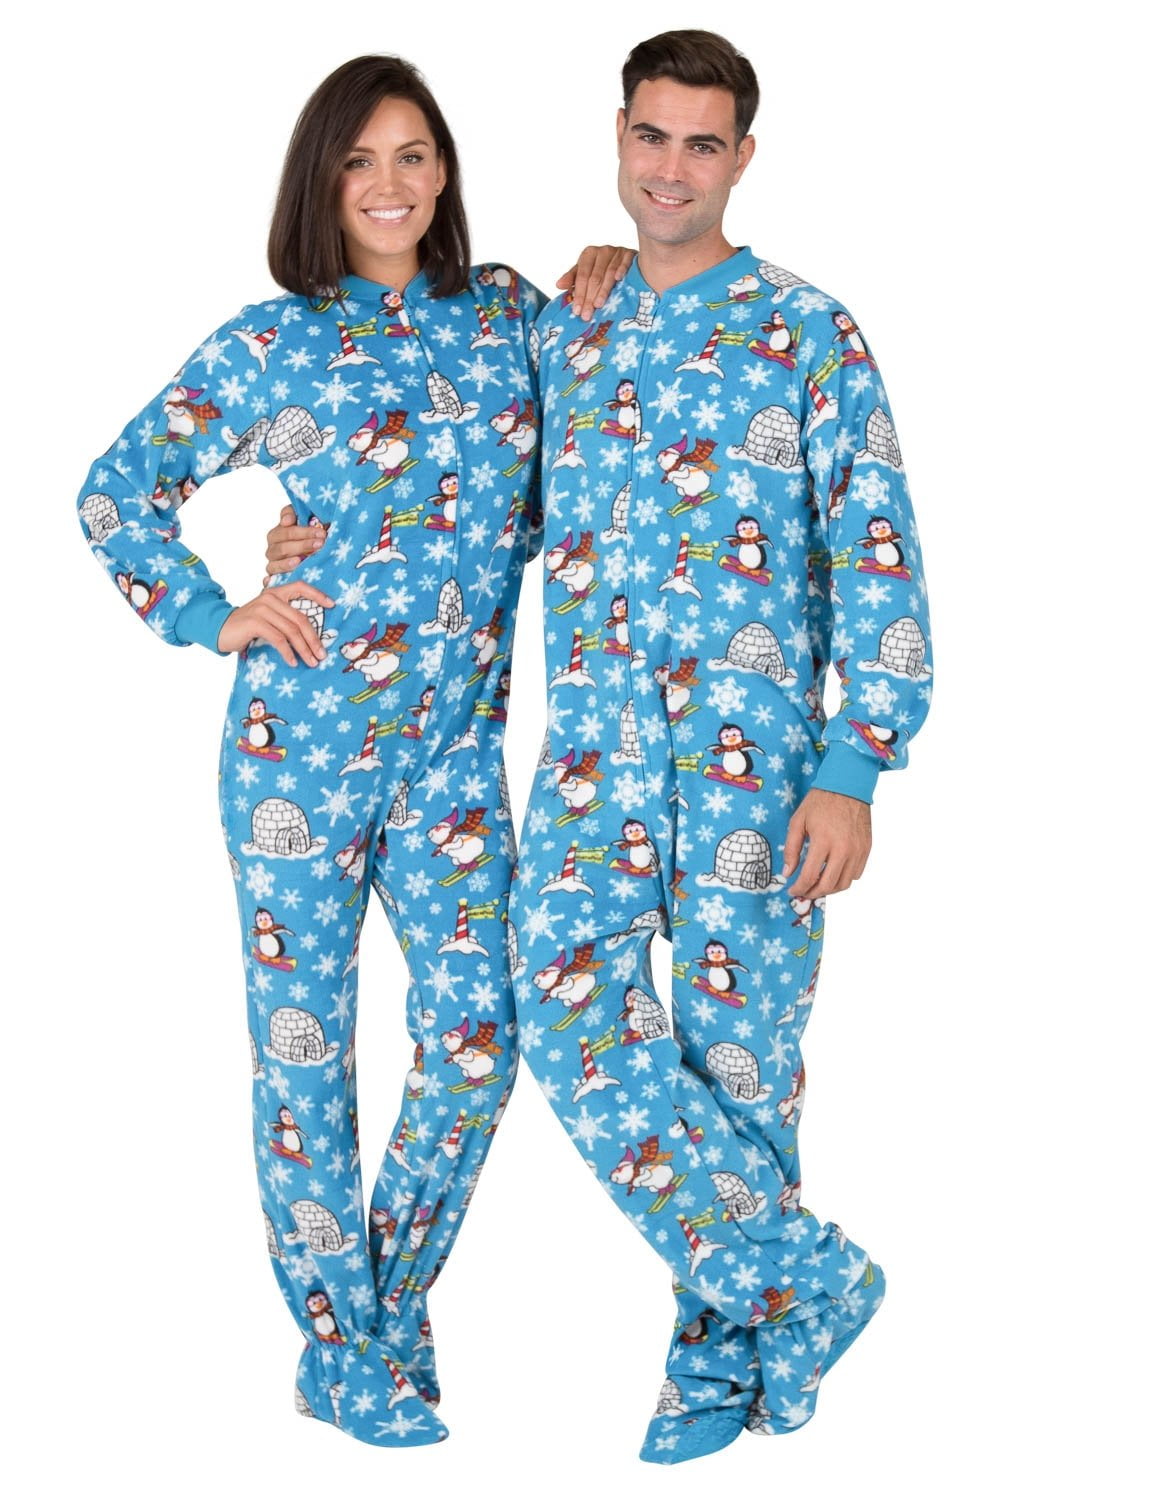 Best of Adult sized footie pajamas